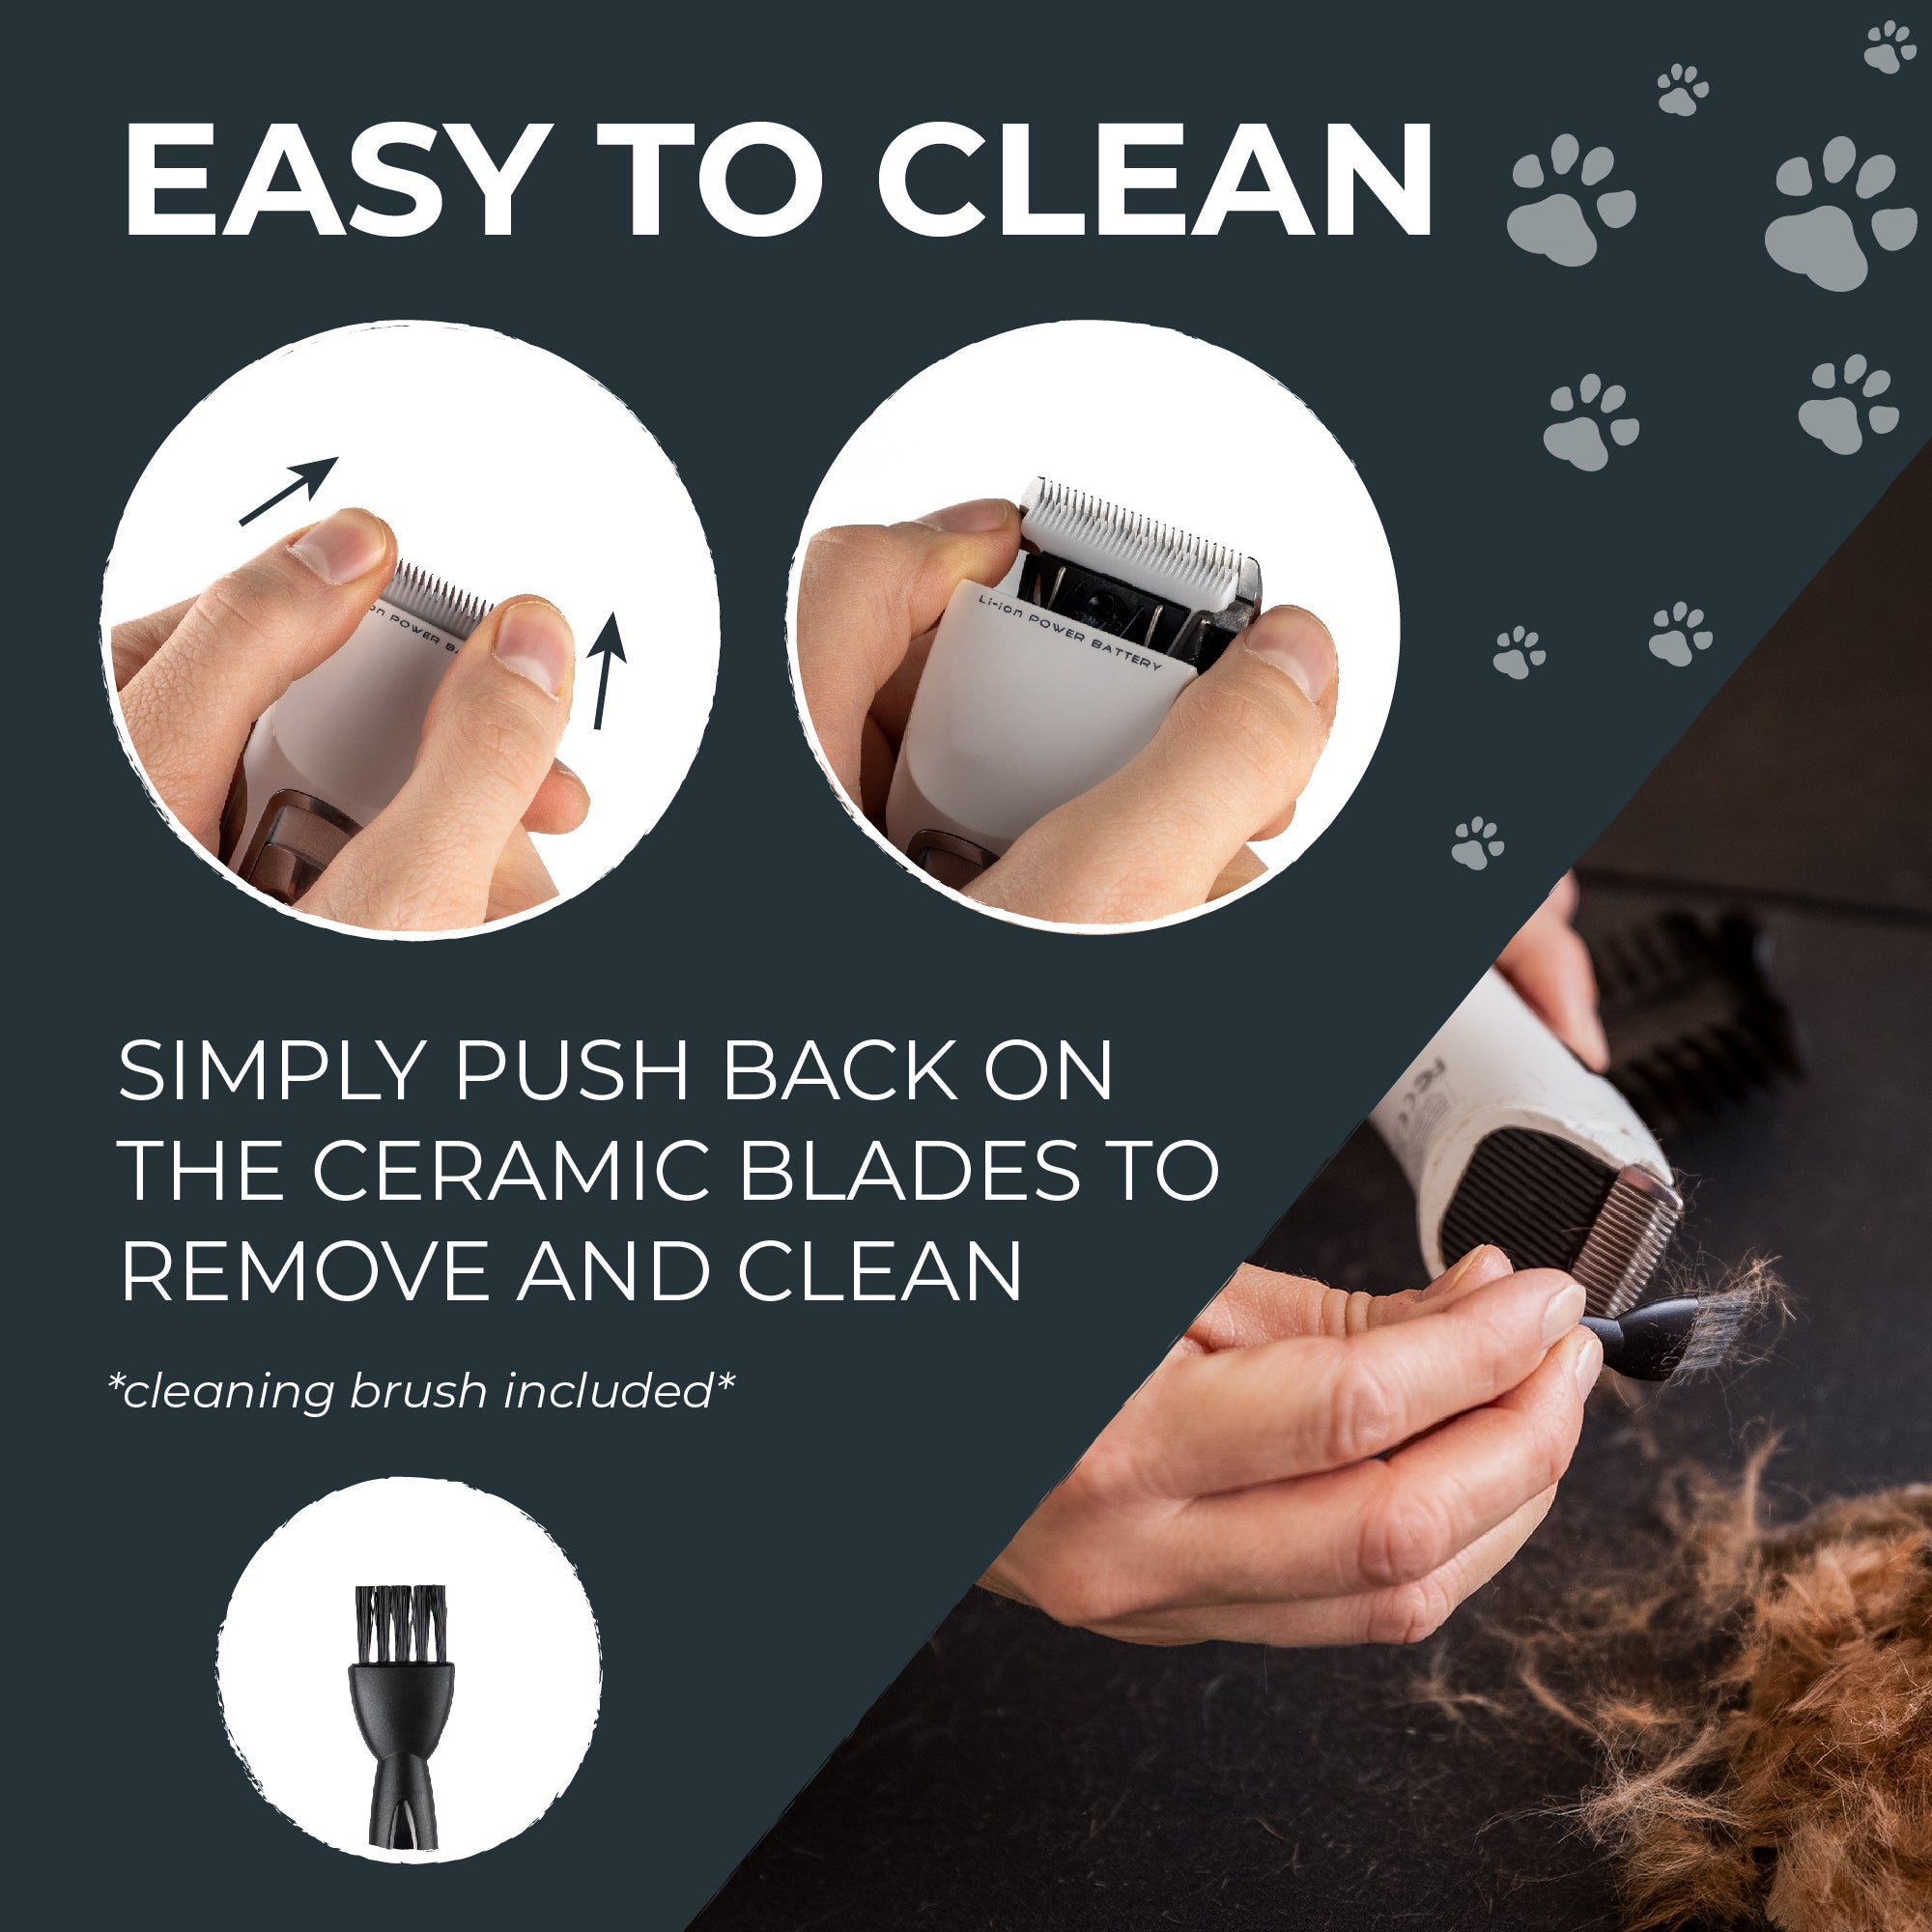 Mighty Paw Professional Dog Grooming Clippers